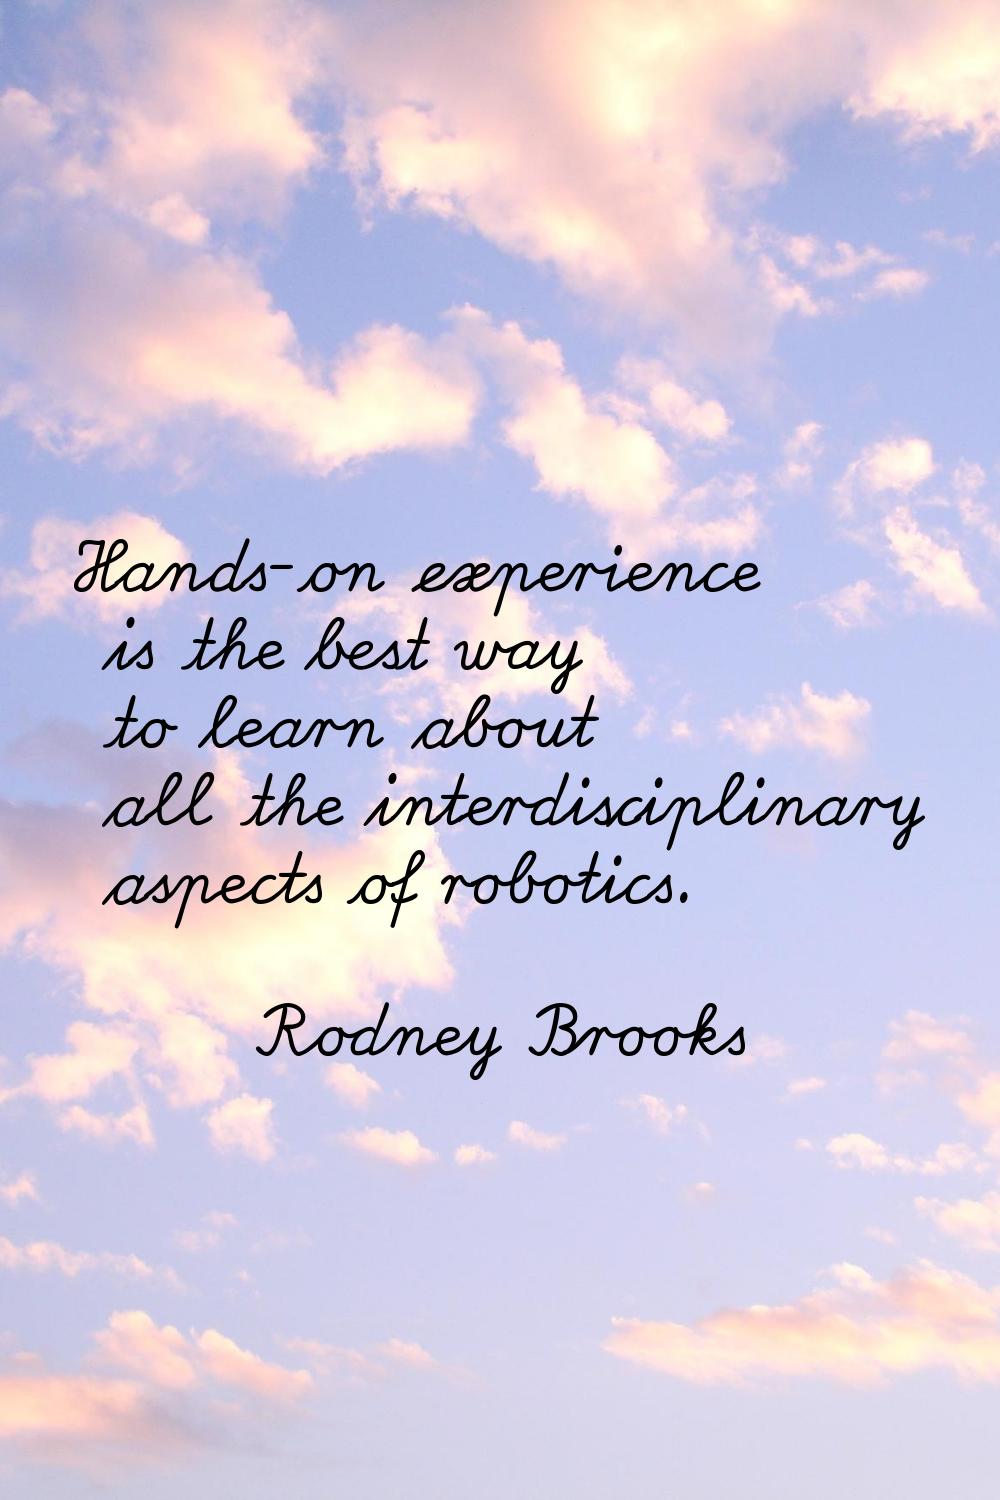 Hands-on experience is the best way to learn about all the interdisciplinary aspects of robotics.